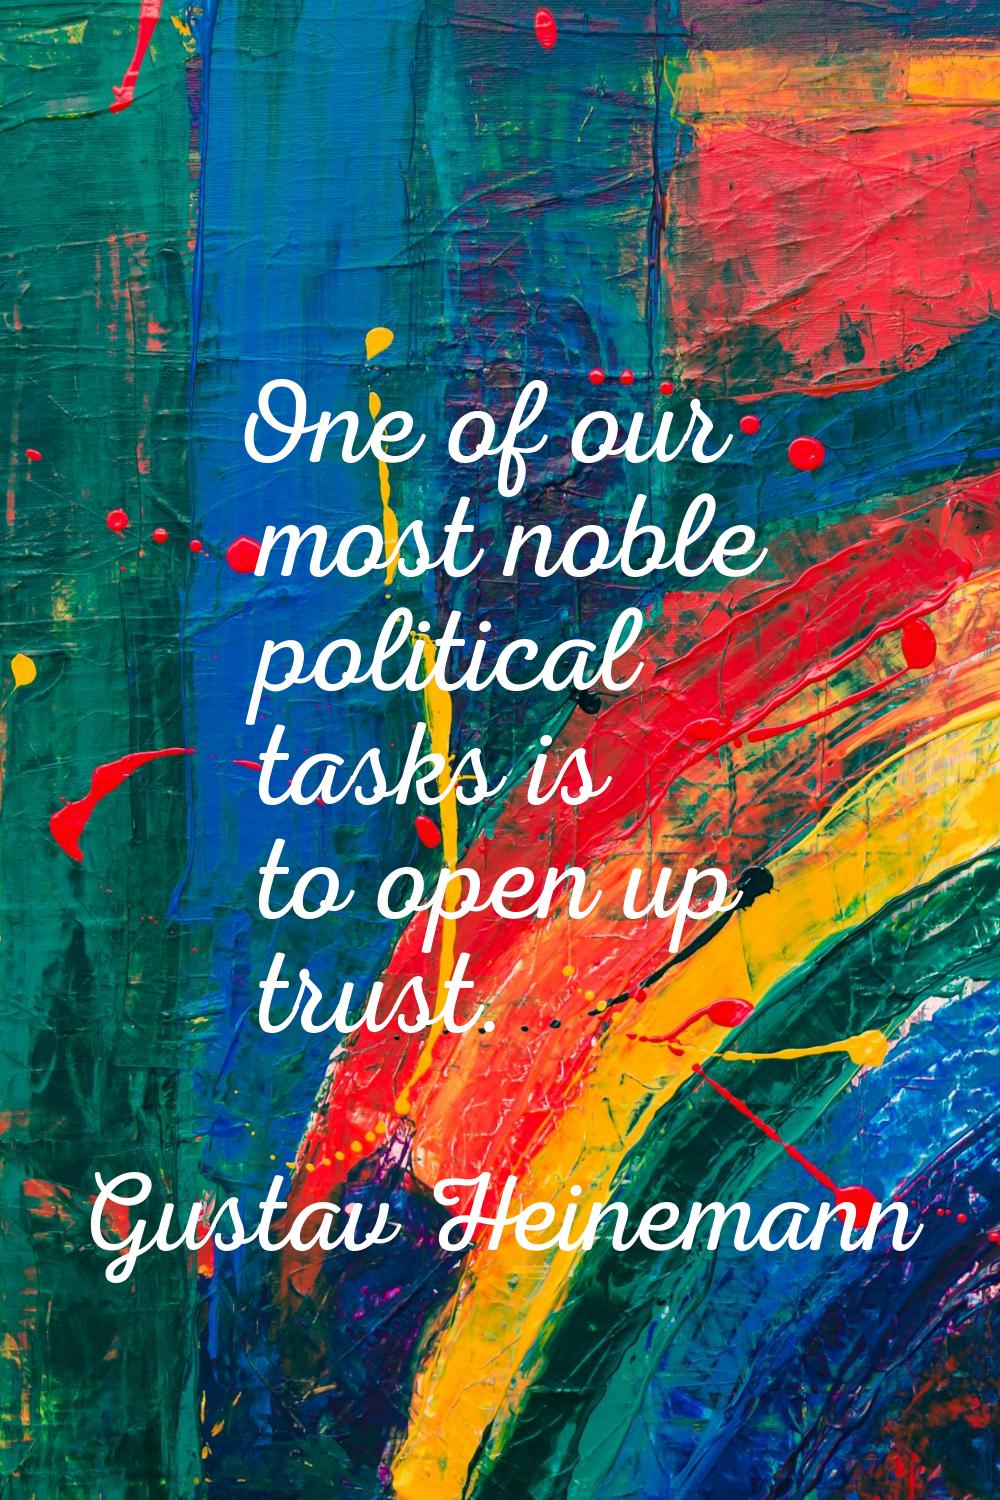 One of our most noble political tasks is to open up trust.